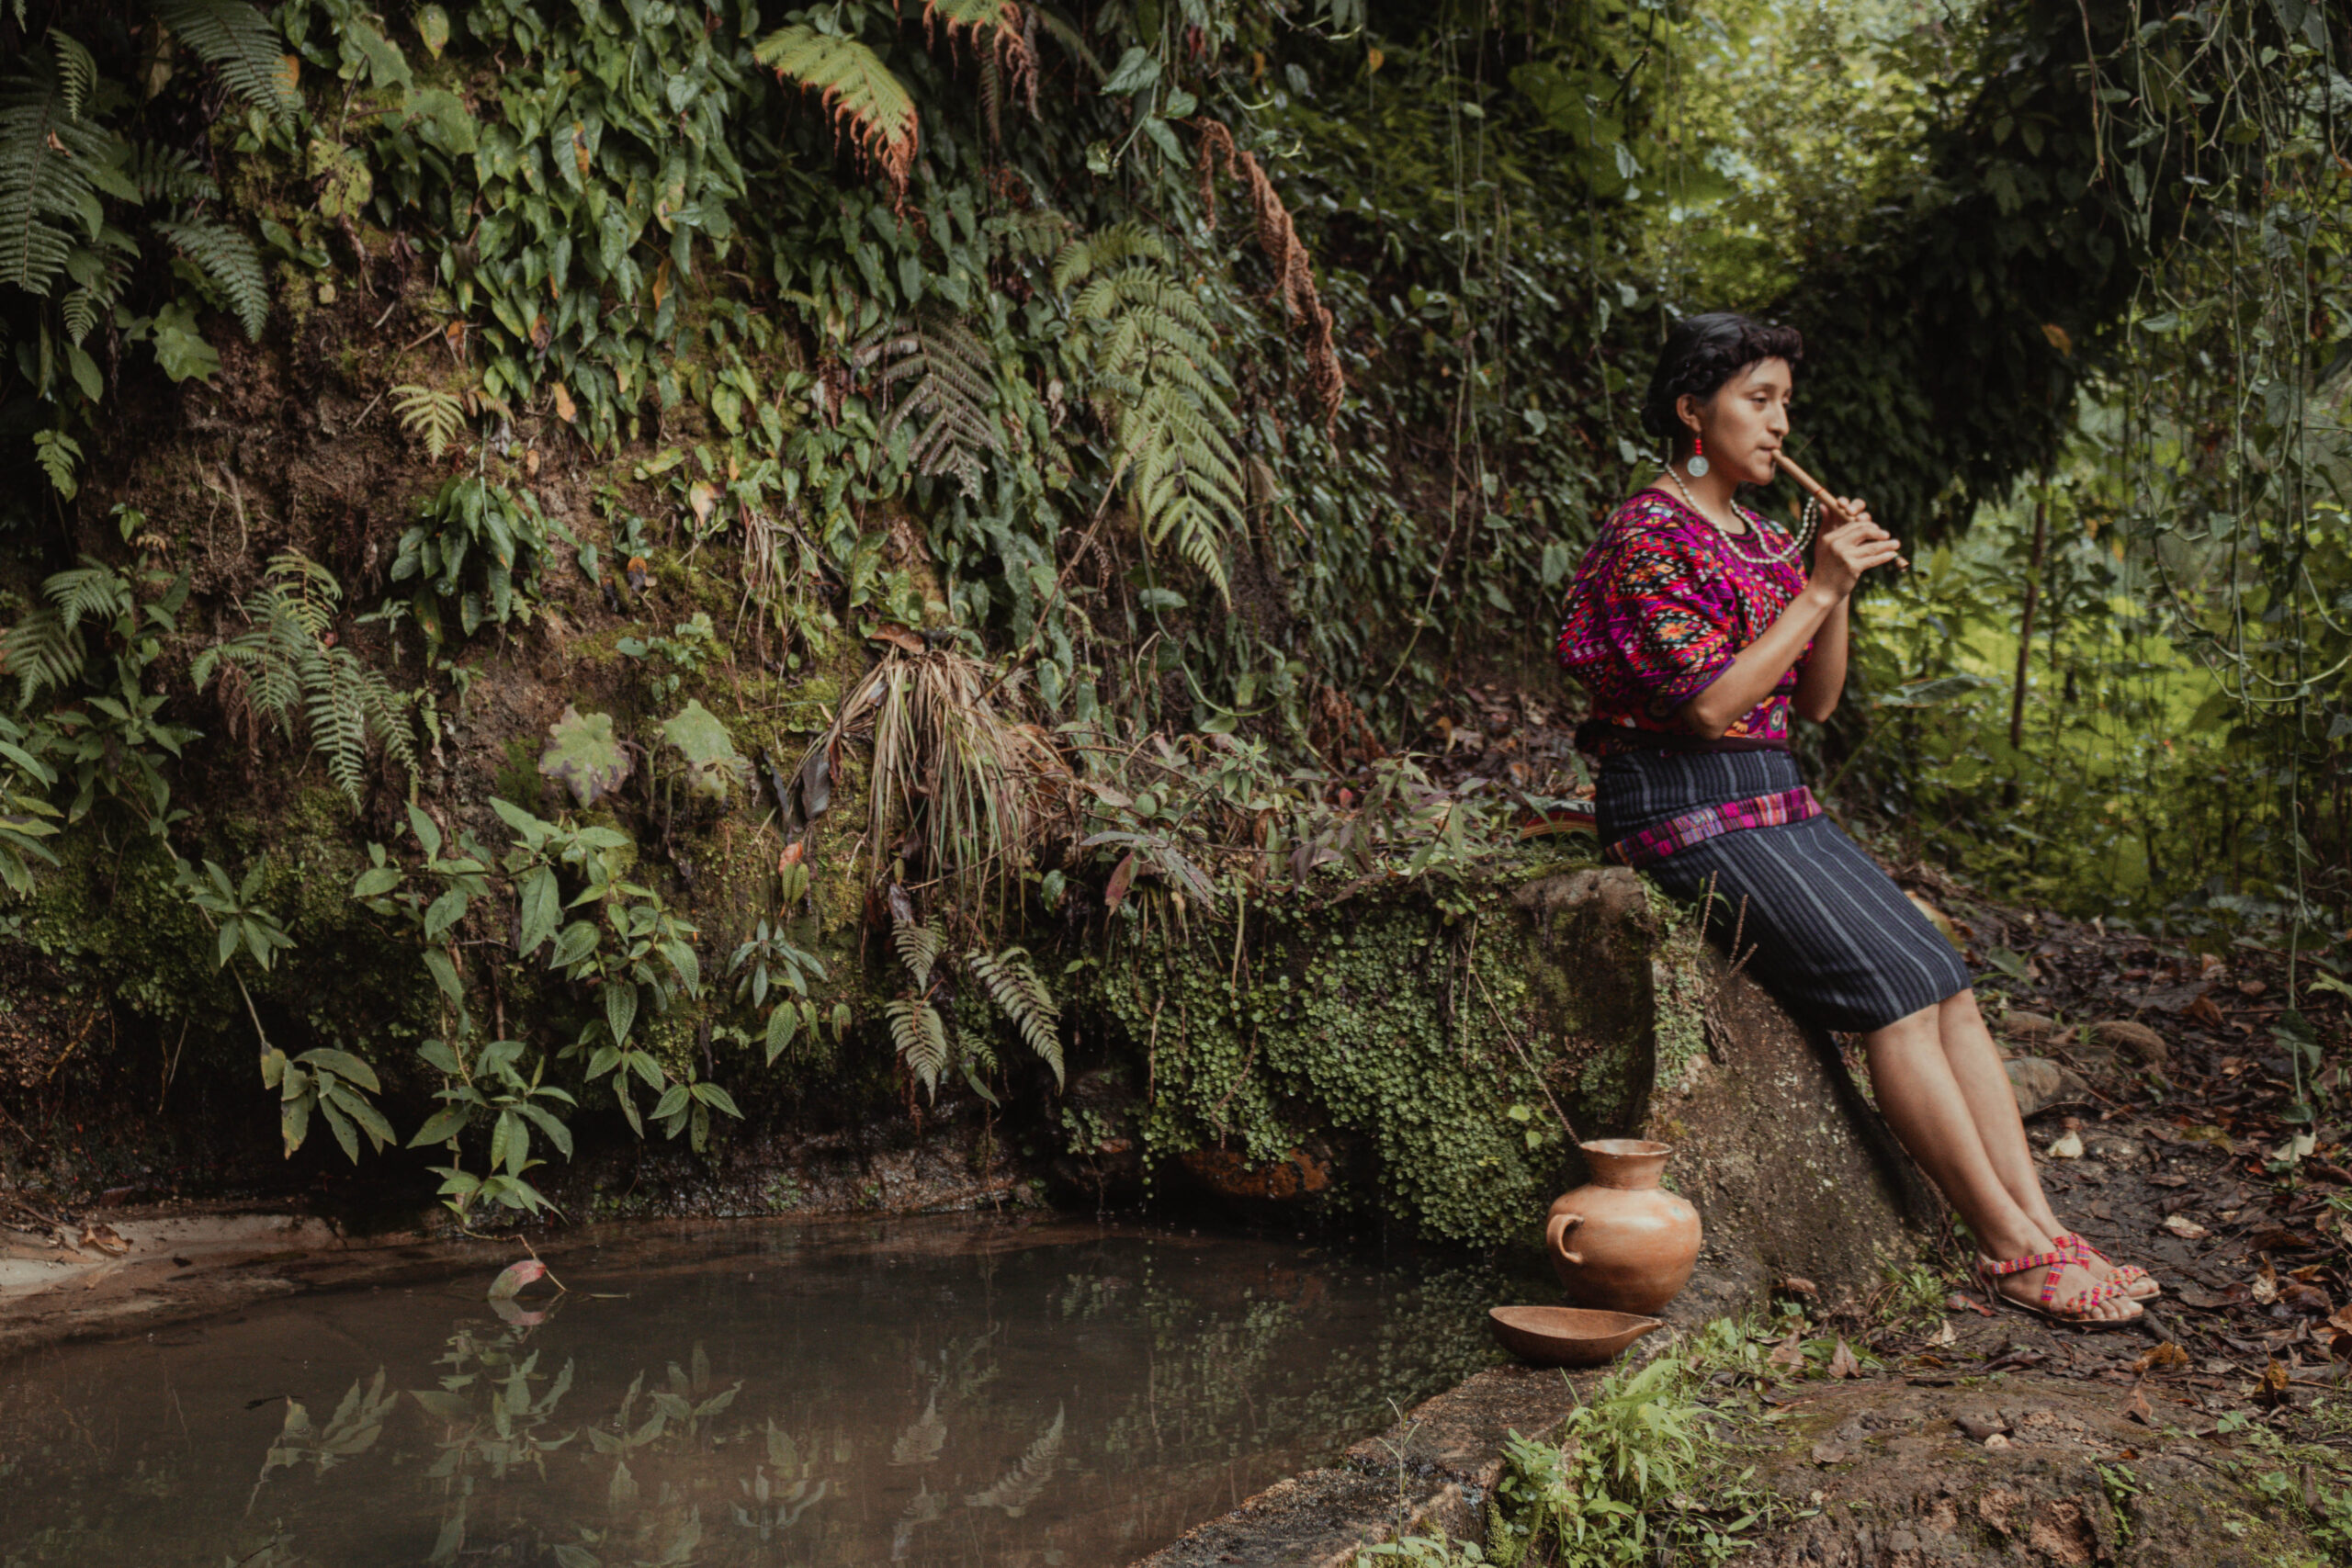 Young indigenous woman from the Quiché Maya People of Guatemala next to a water source with offerings in gratitude to nature. 
The “Indigenous Innovative Solutions” Photography Contest Winners
Name of the photo: Children of the earth. Author: Alexander Pérez Ventura